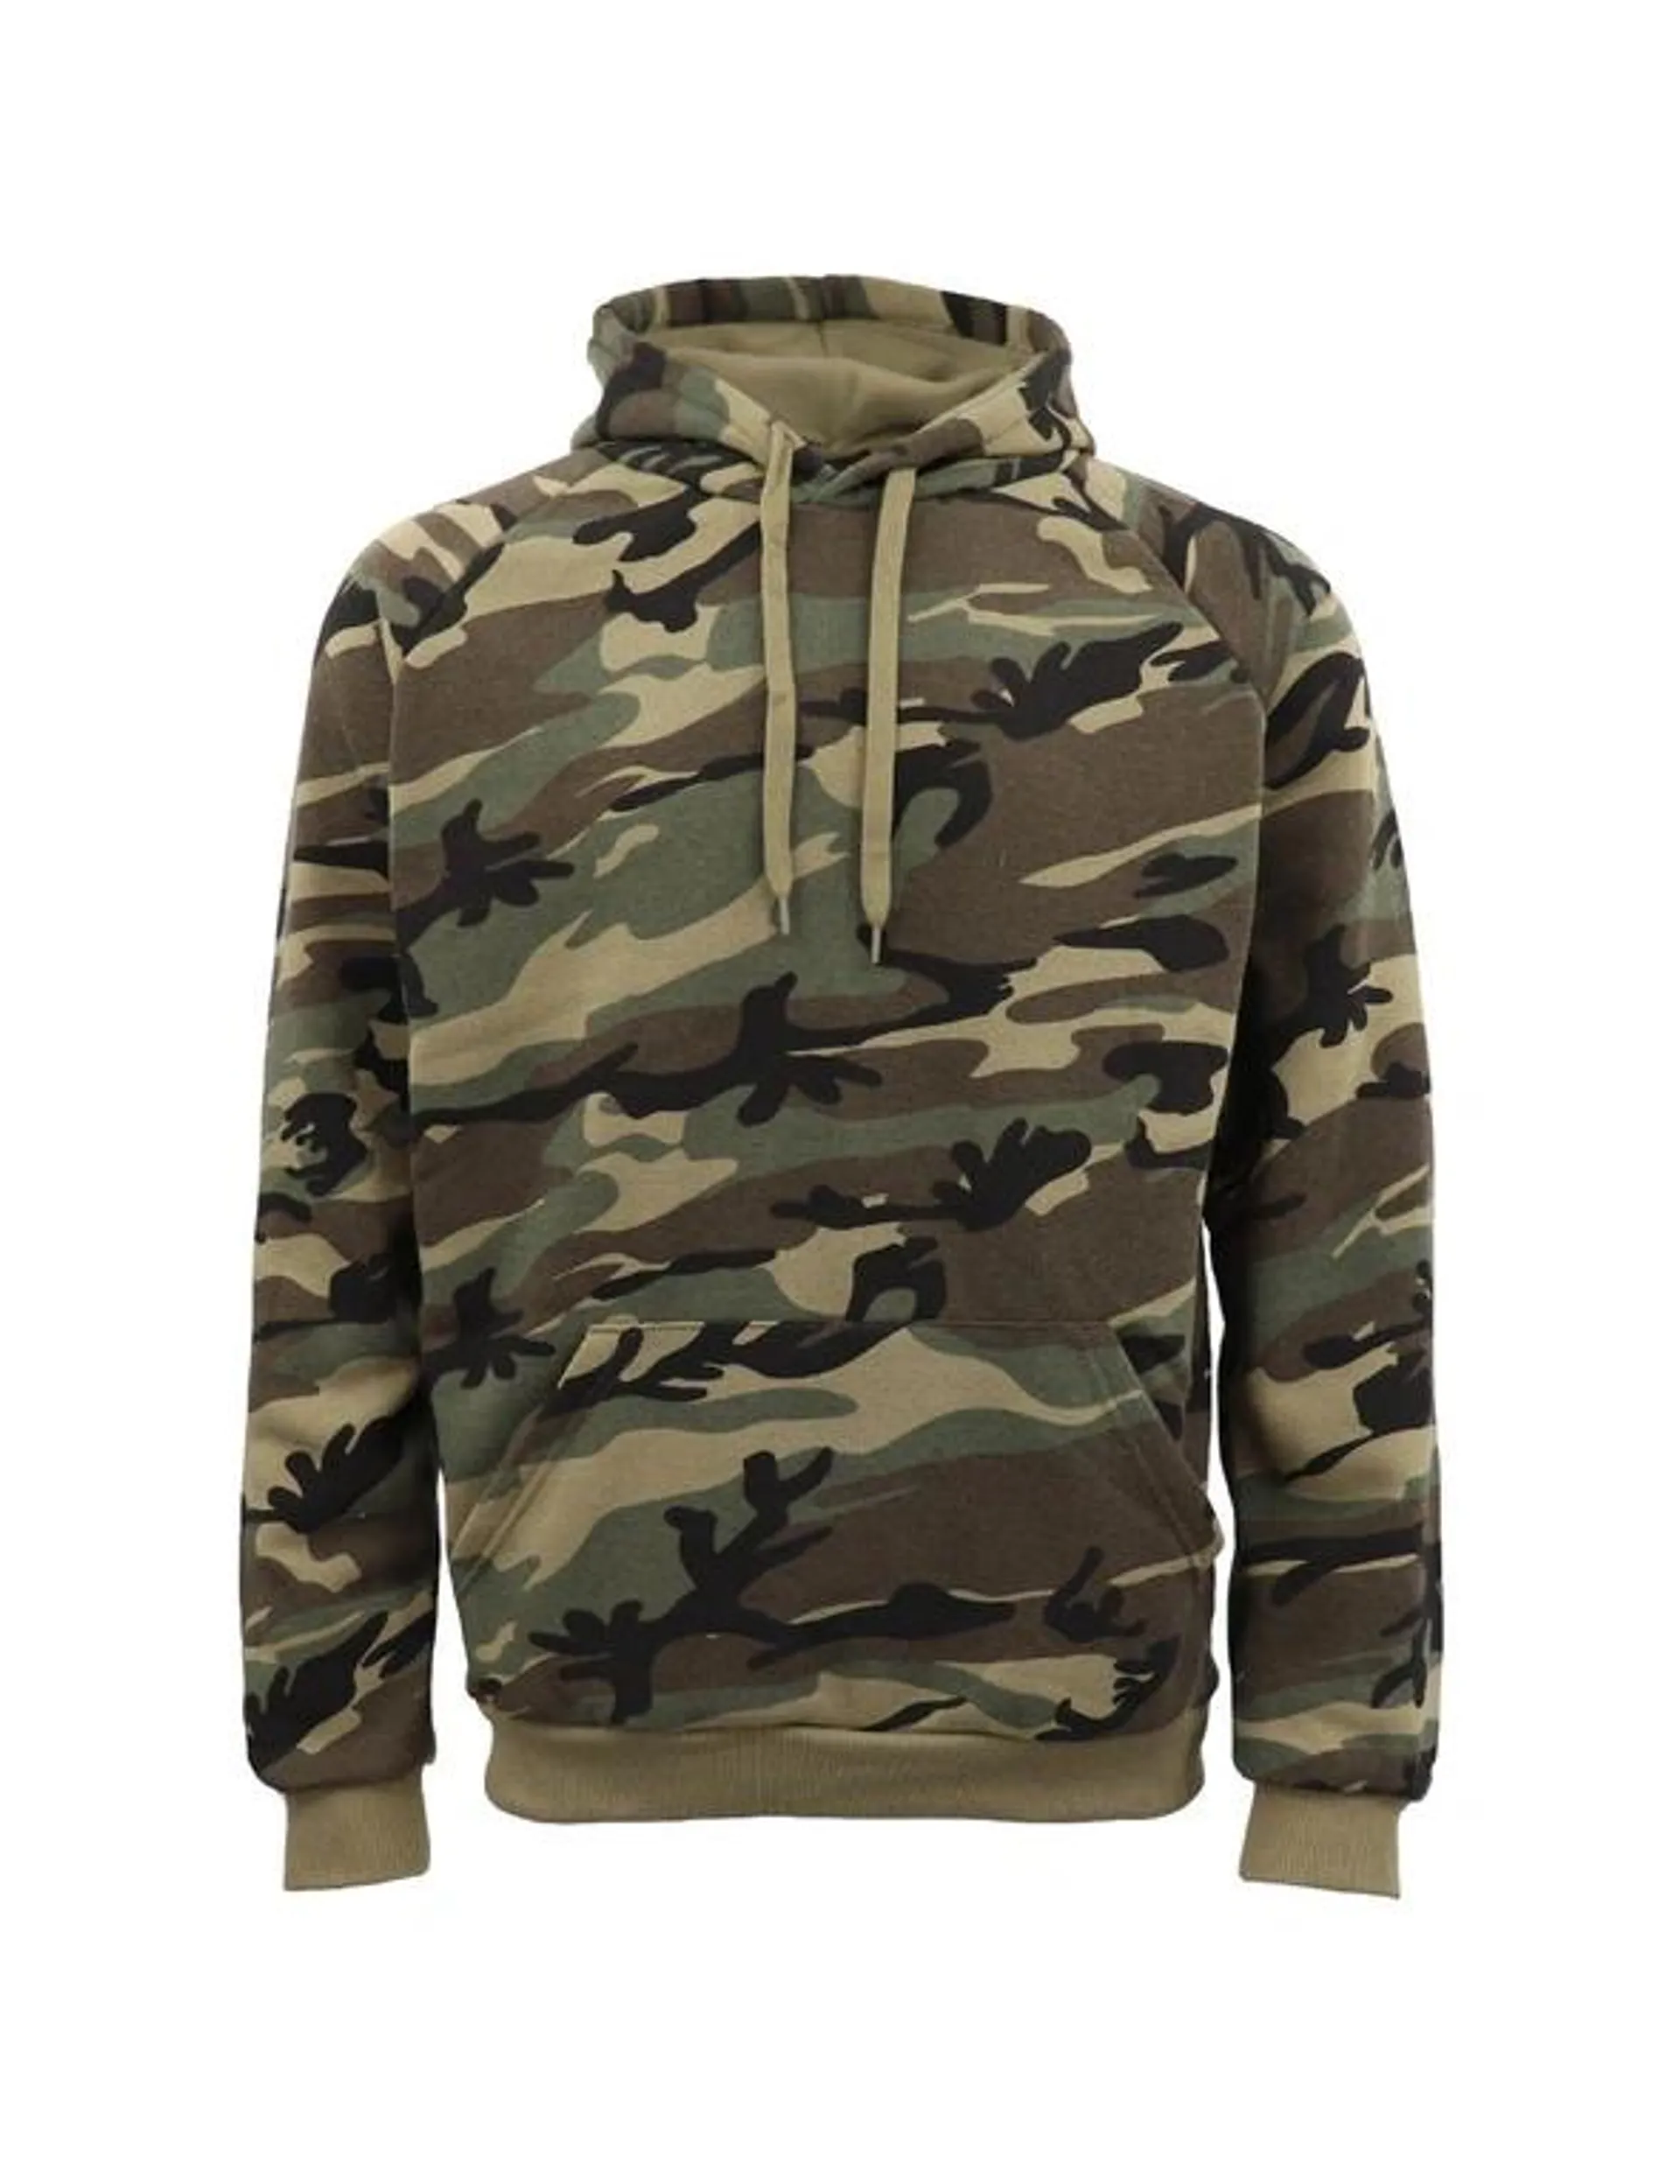 Adult Men's Fleece Pullover Hoodie Hooded Jacket Military Camouflage Sweater - Olive Camo